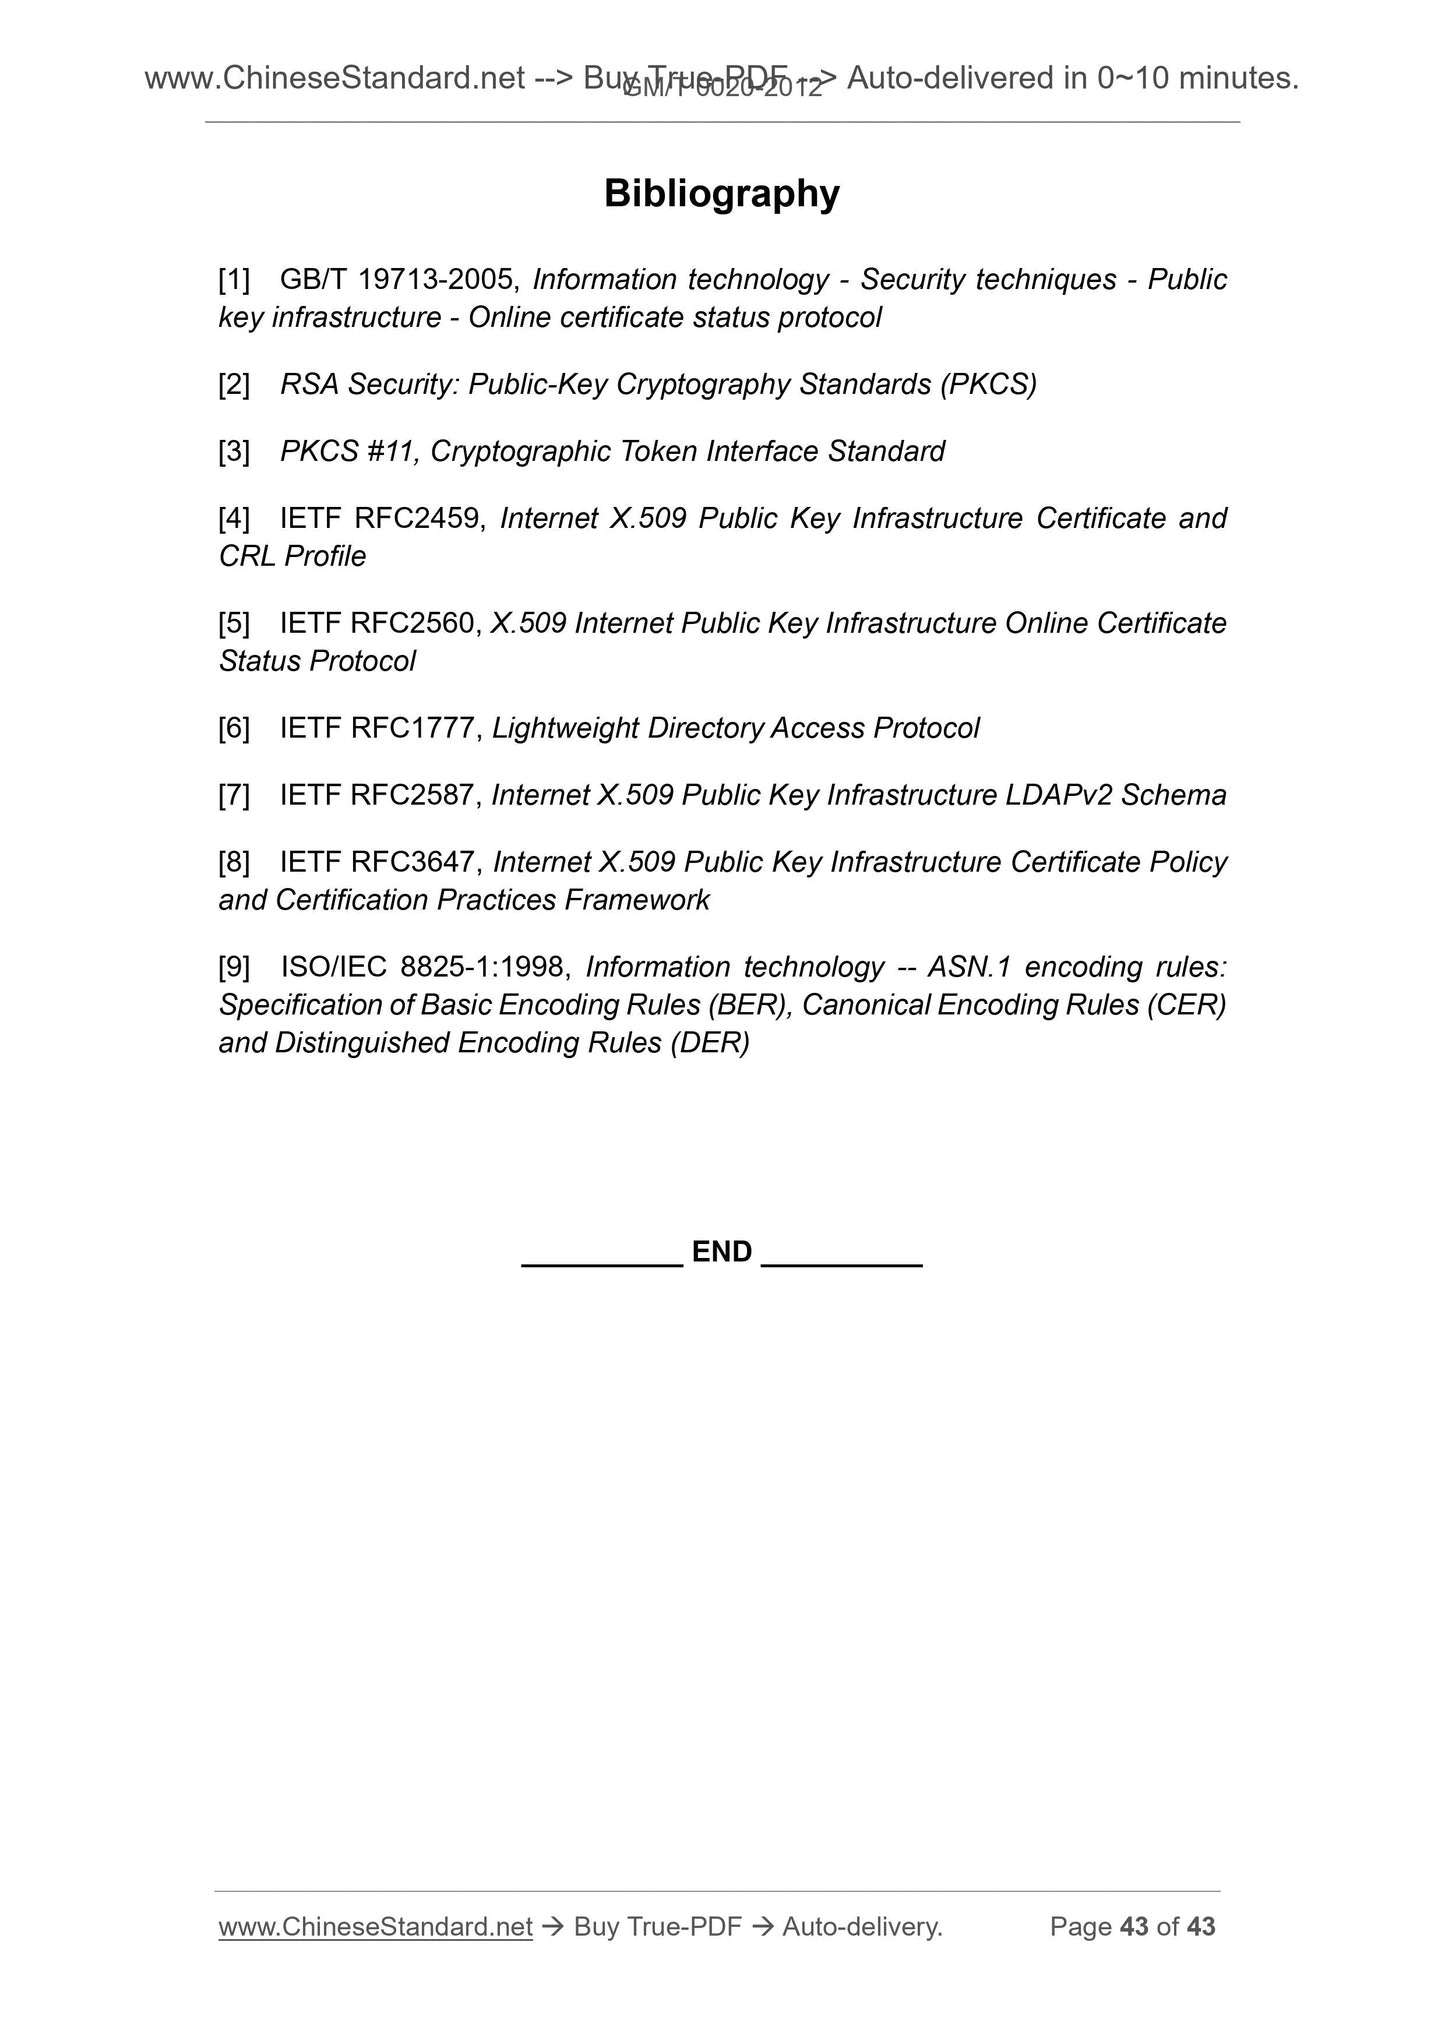 GM/T 0020-2012 Page 12